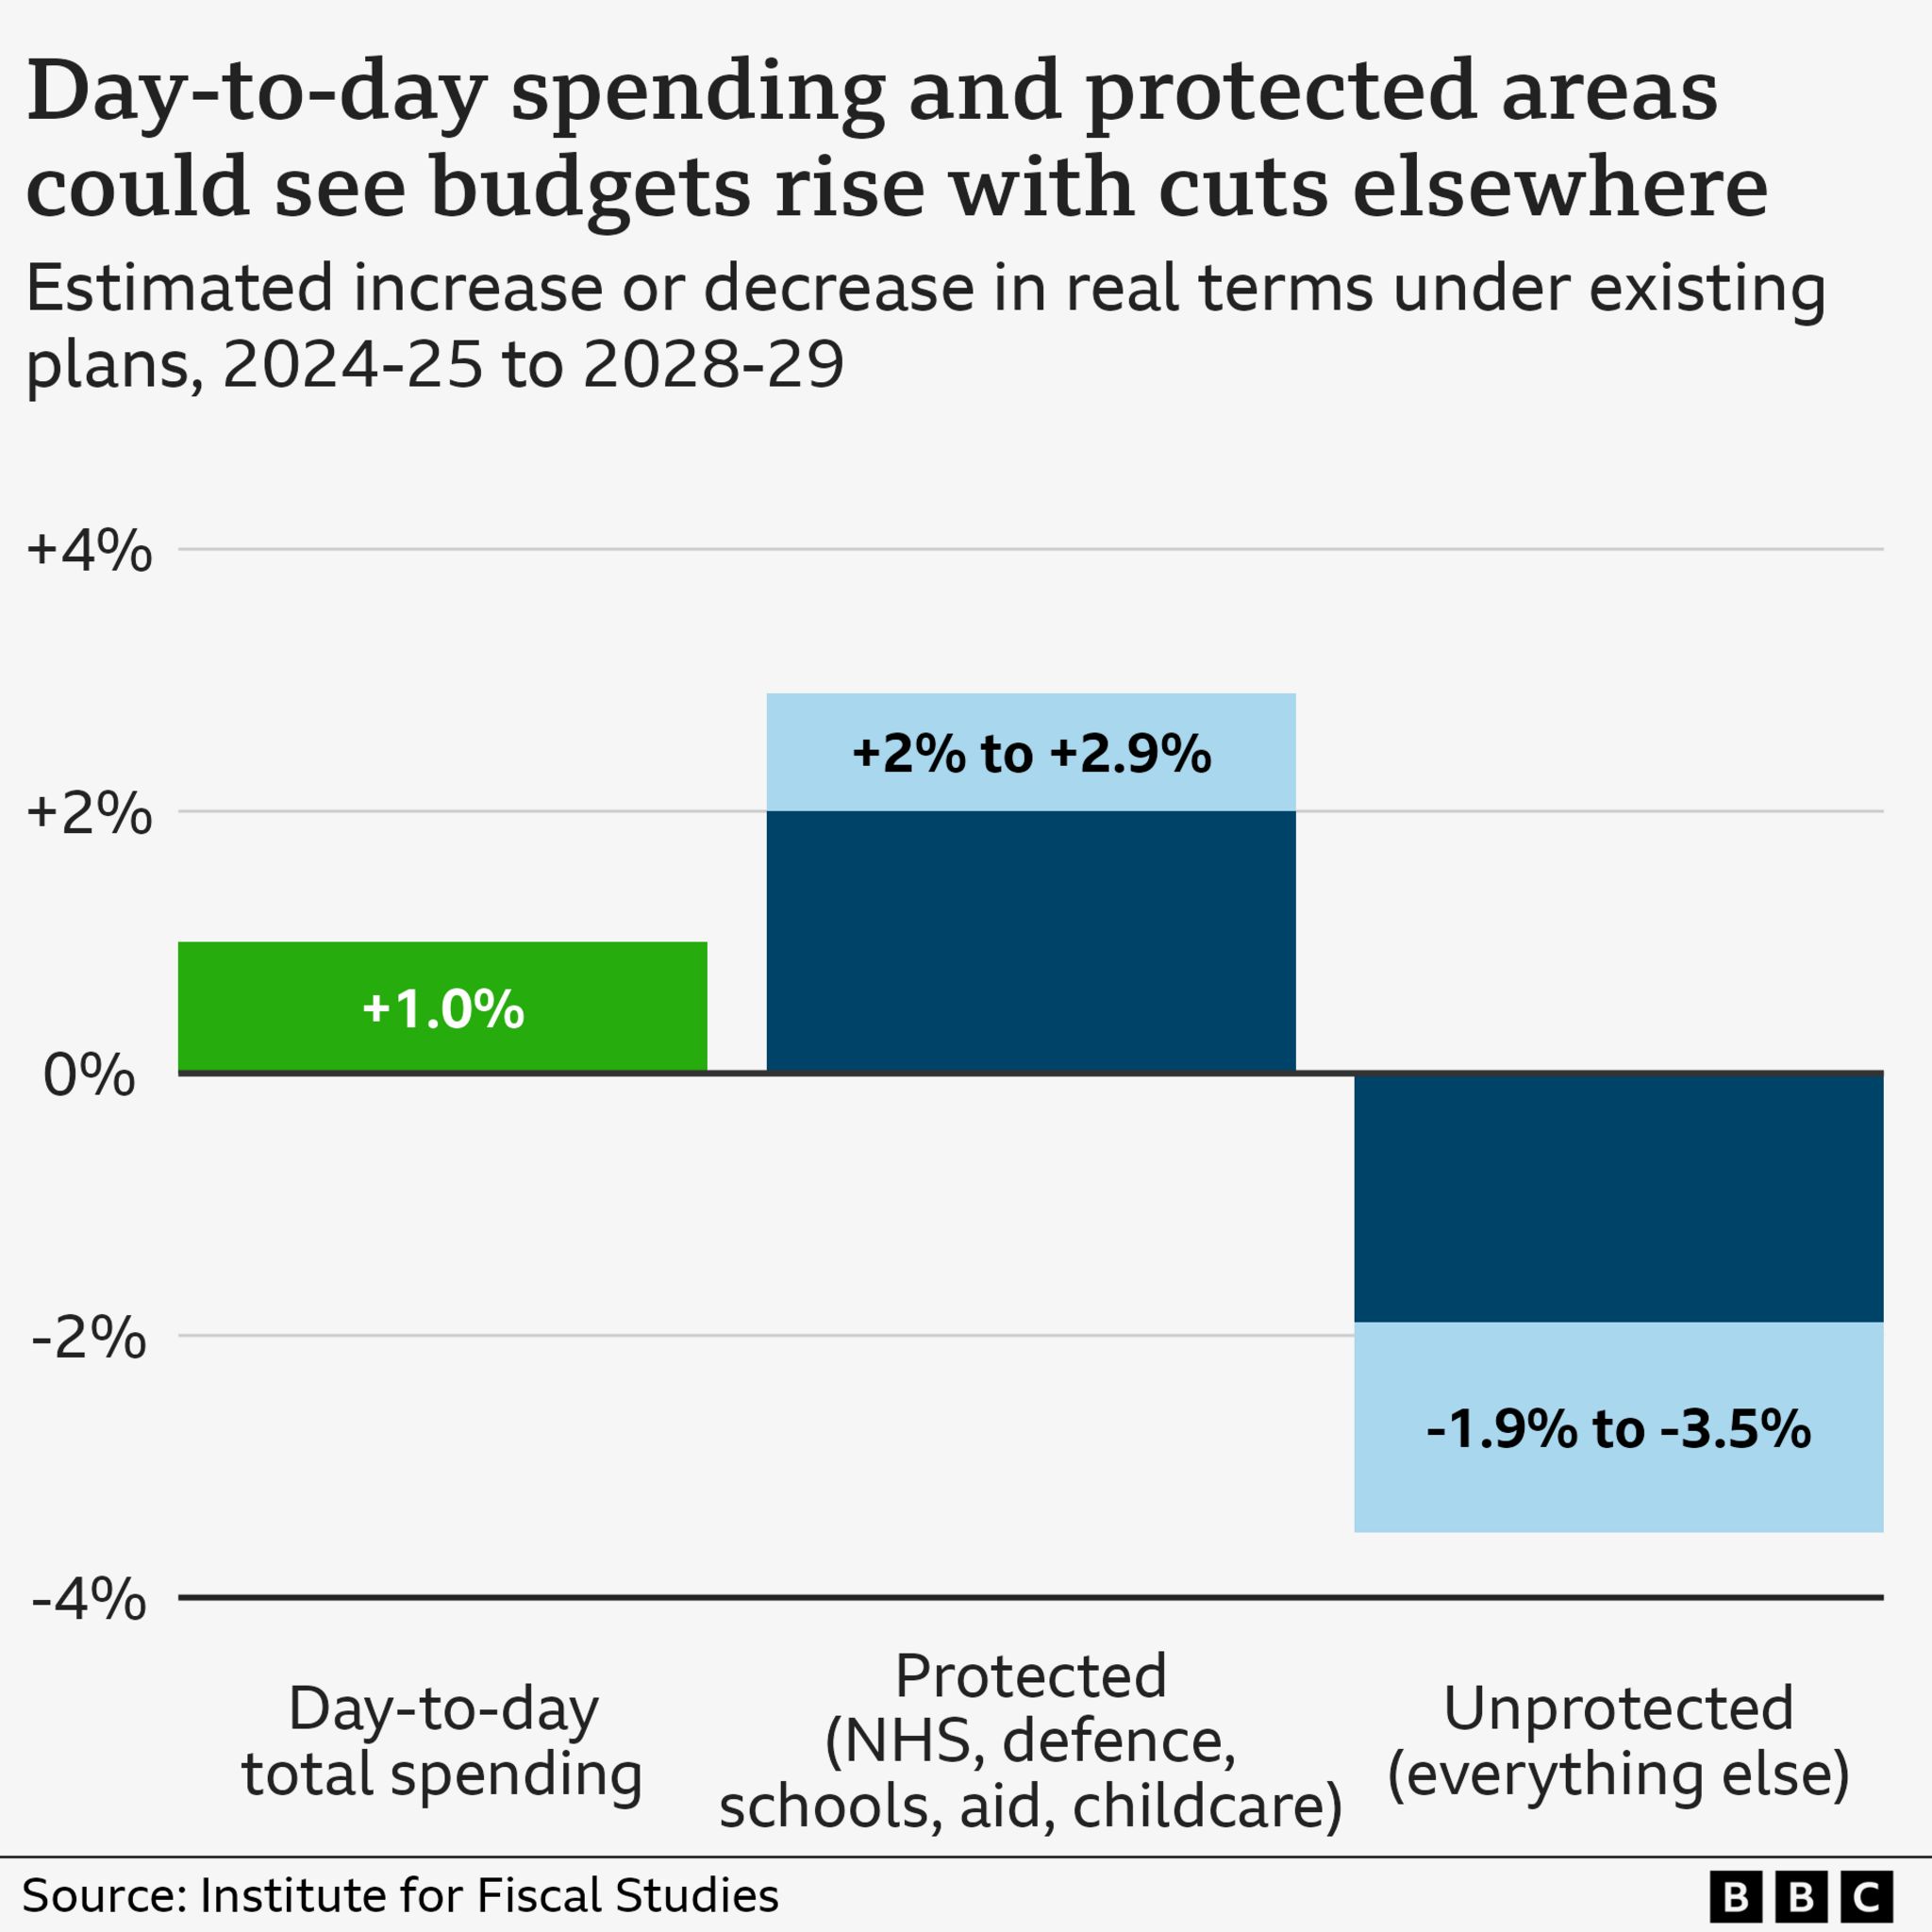 Bar chart showing changes in spending between 2024-25 and 2028-29, showing a rise in overall spending of 1%, a rise of between 2% and 2.9% for protectected areas (NHS, defence, schools, aid and childcare) and a fall of between 1.9% and 3.5% for everything else